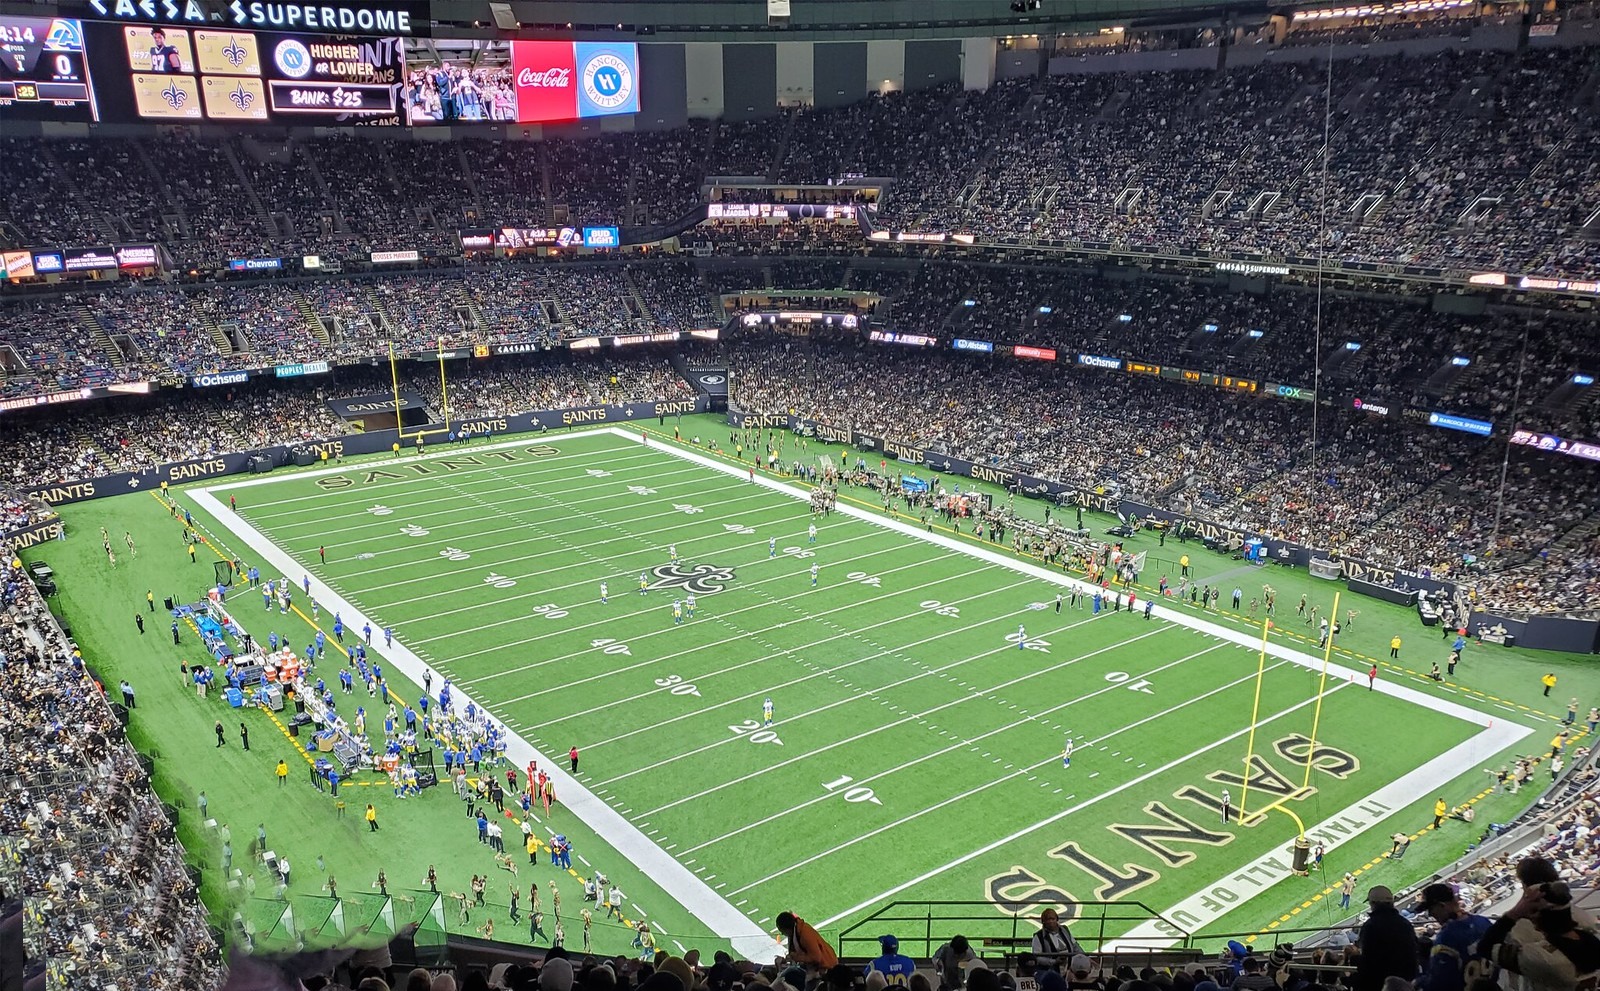 View from the upper deck at the Superdome, home of the New Orleans Saints